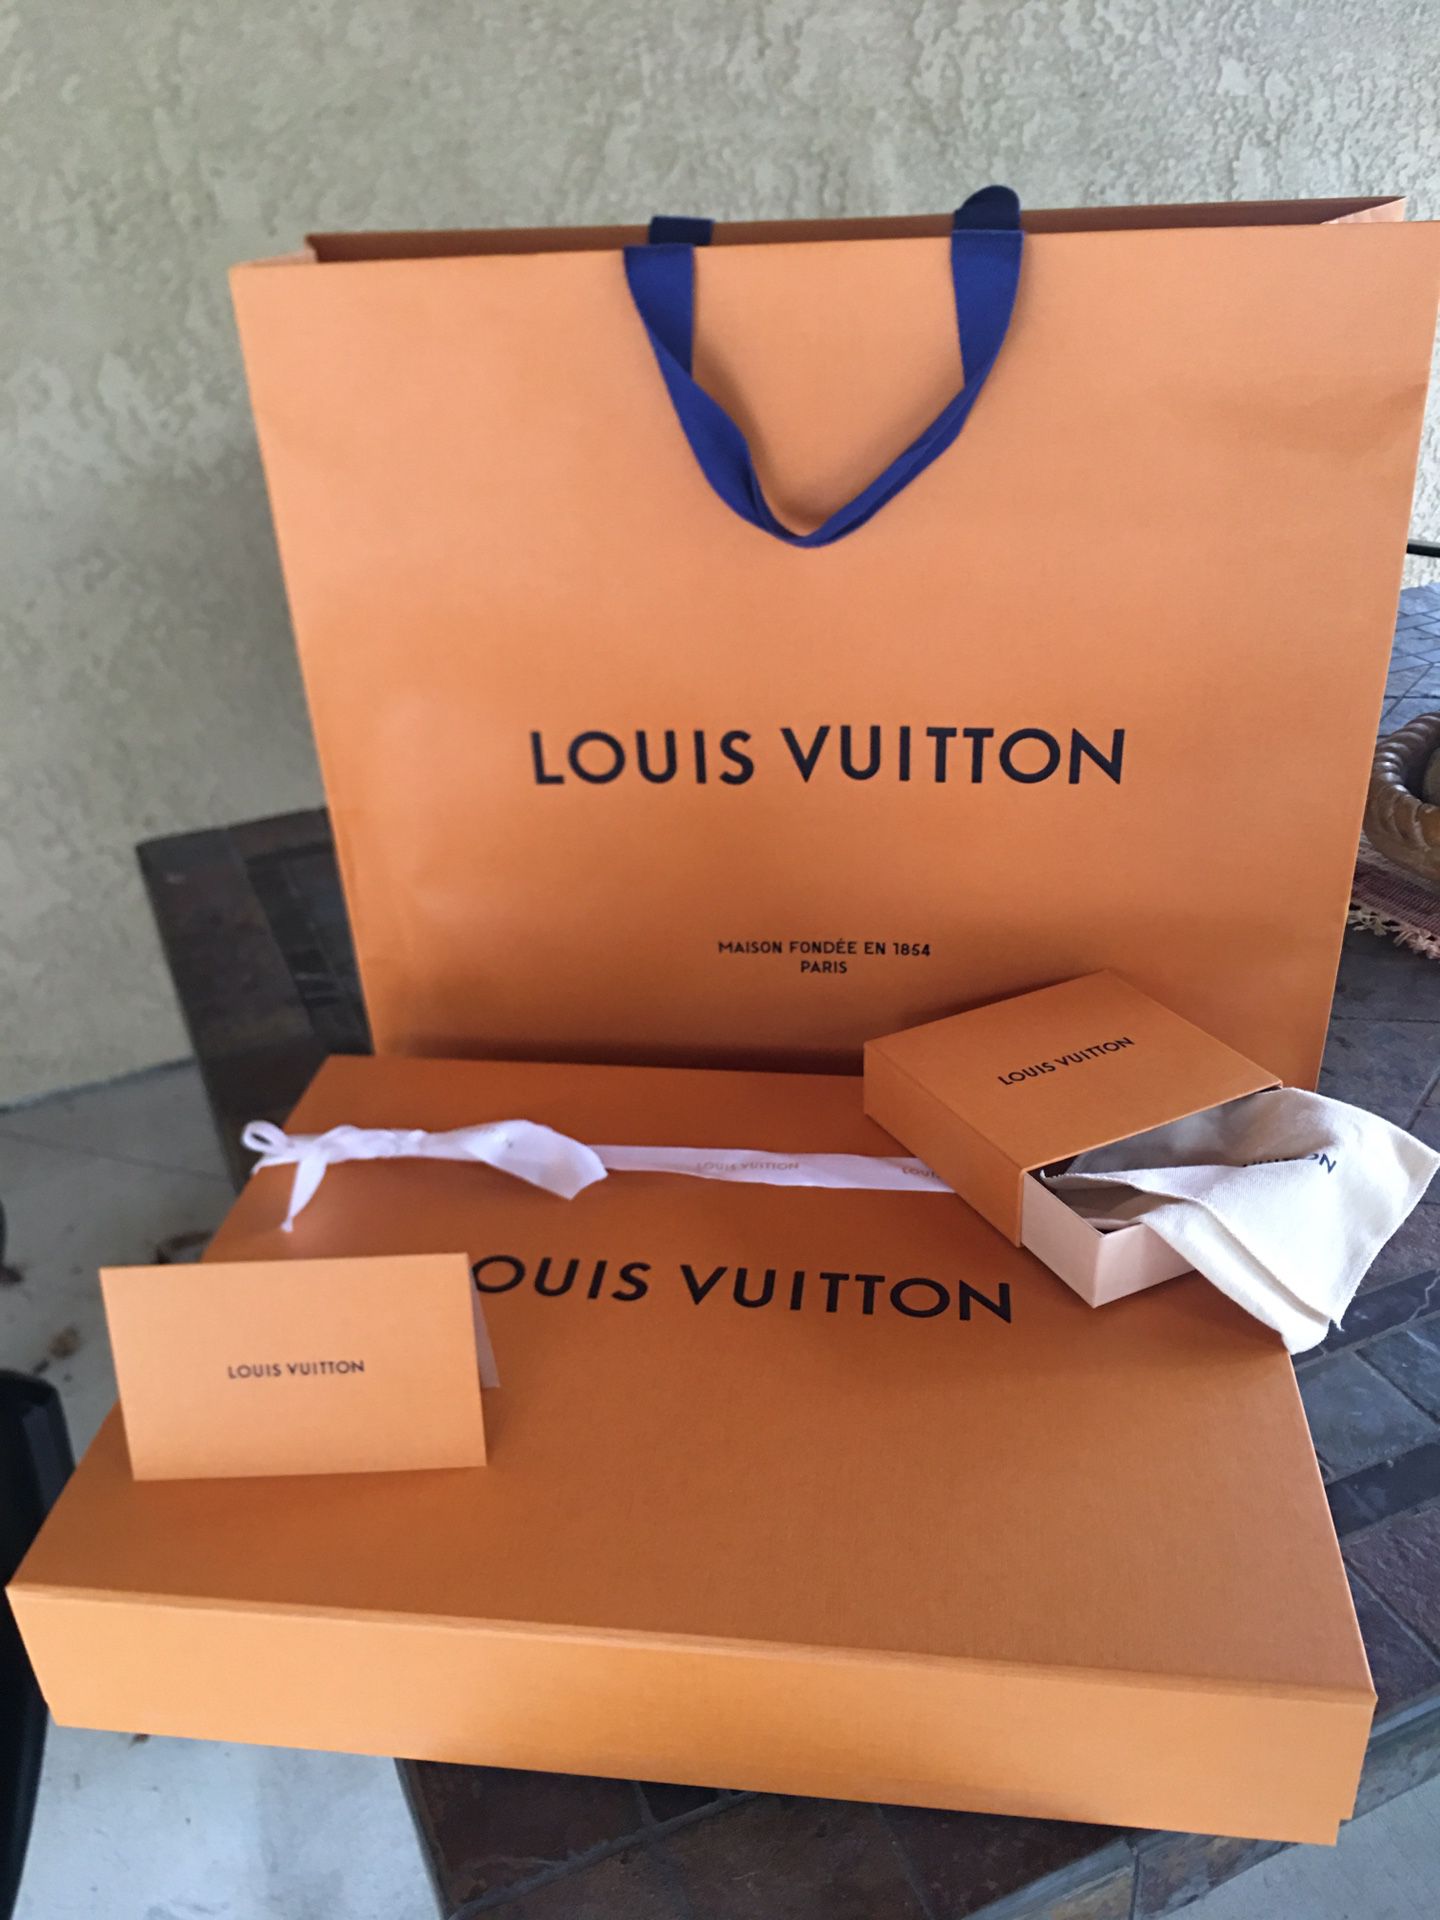 Louis Vuitton gift bag and boxes